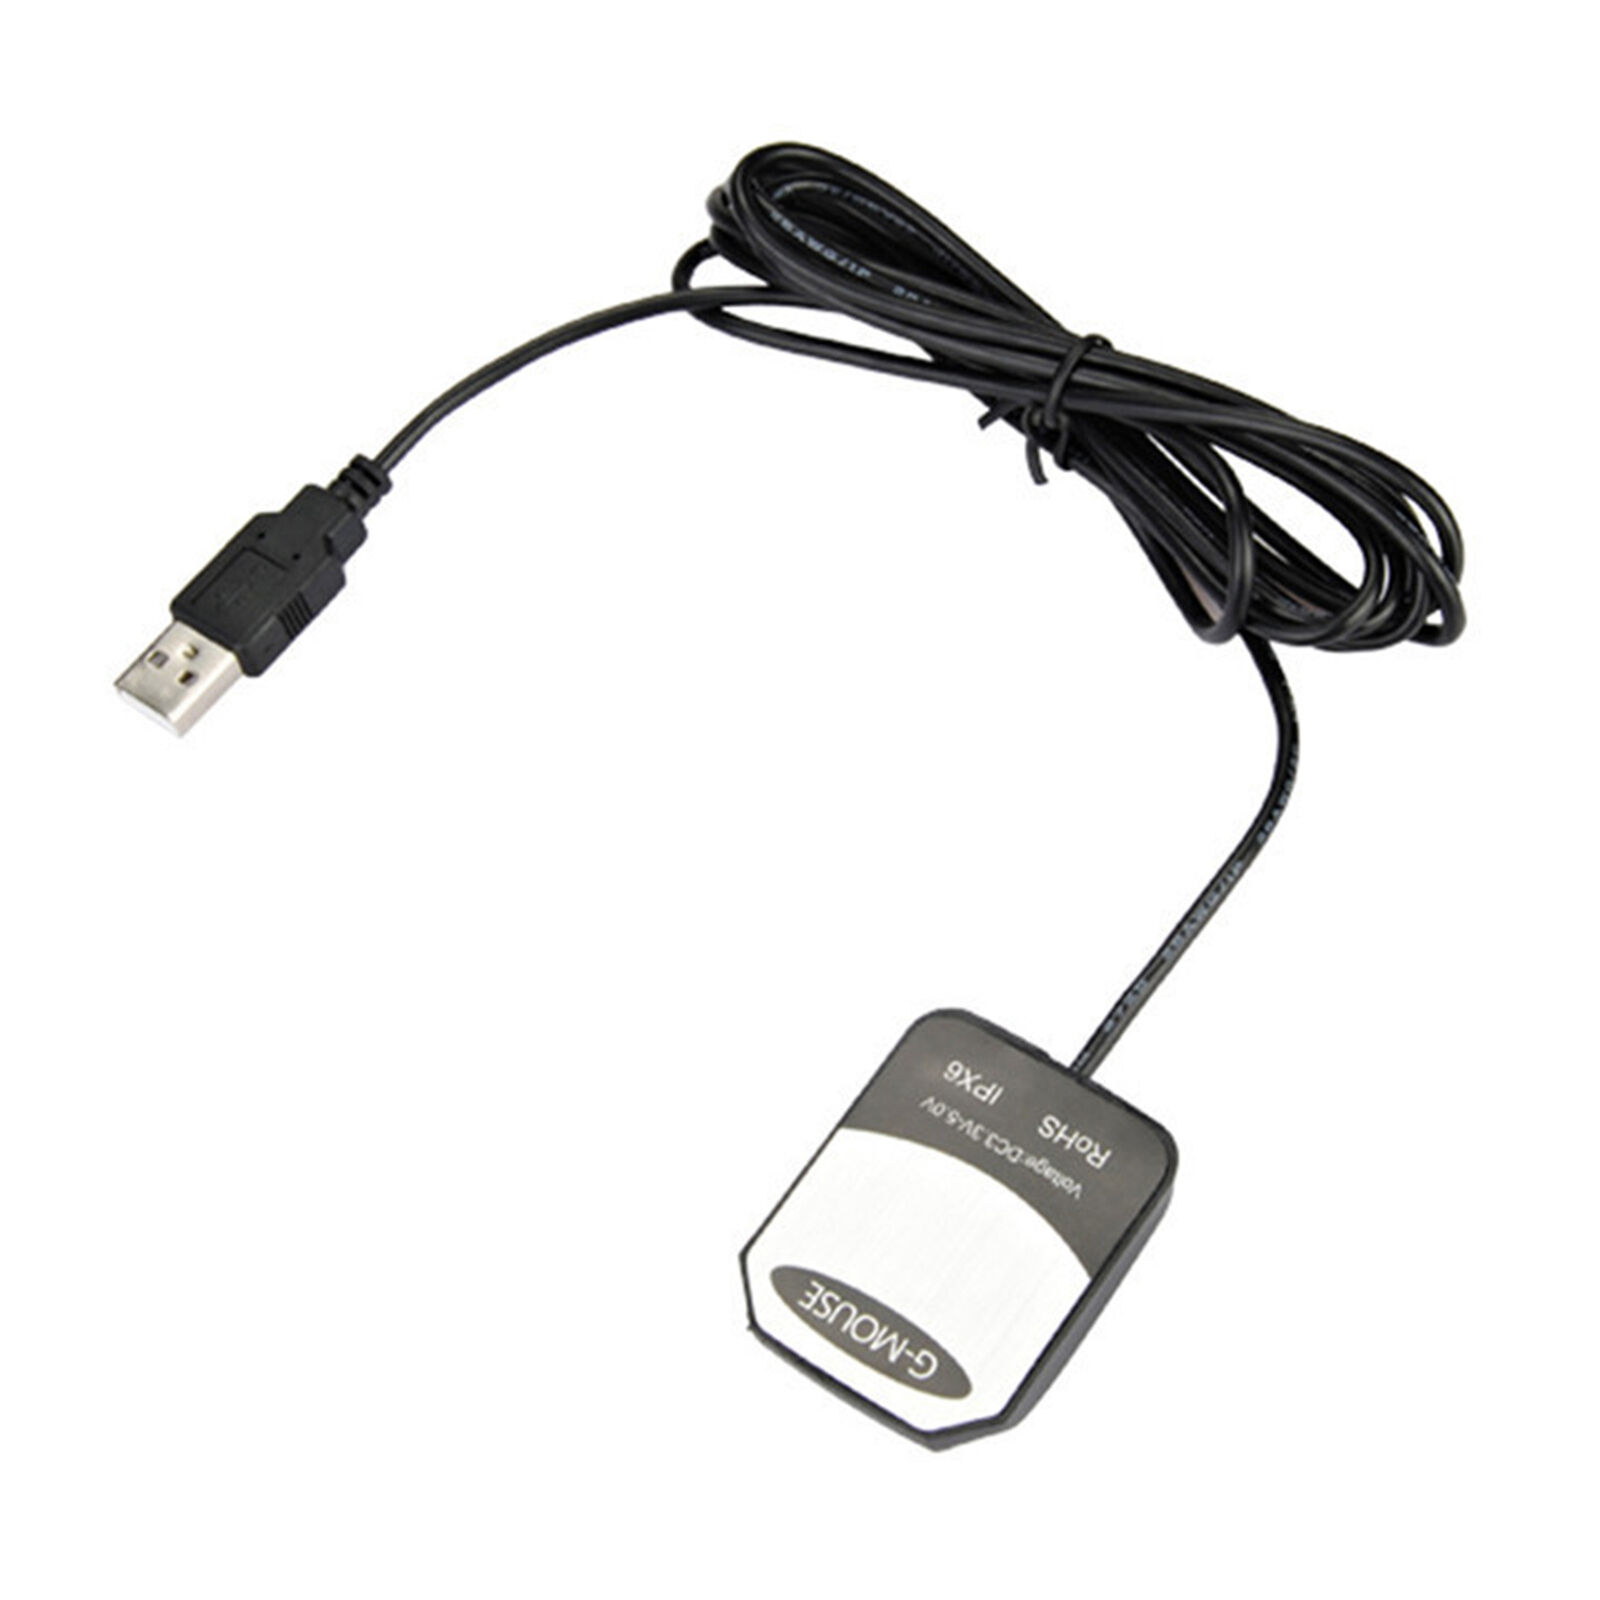 Vk-162 Gps Receiver Dust-tight High Precision Dongle G-mouse Gps Receiver